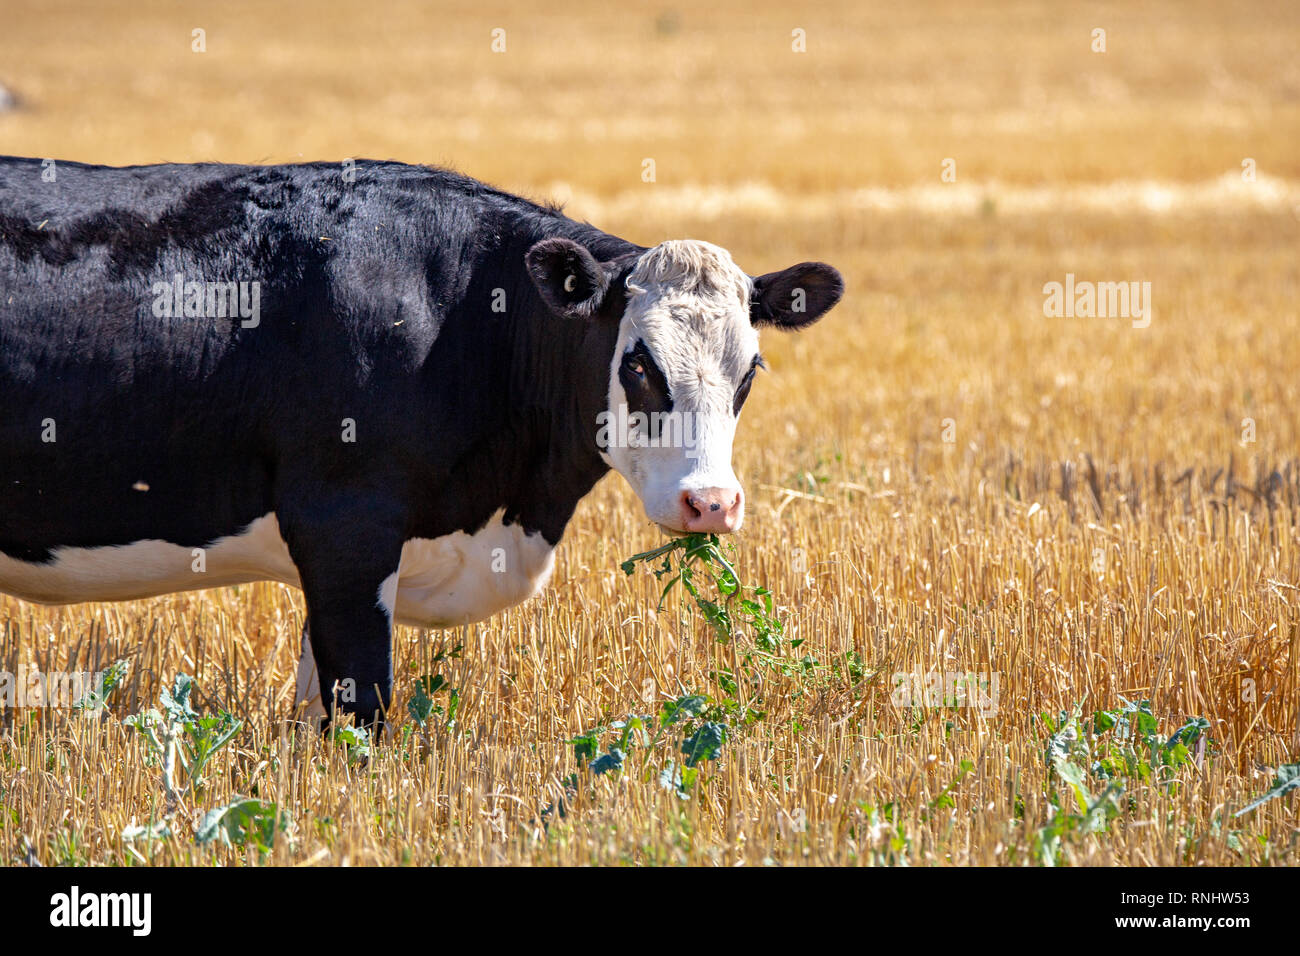 A black and white hereford cow munches on greens in a field in New Zealand Stock Photo